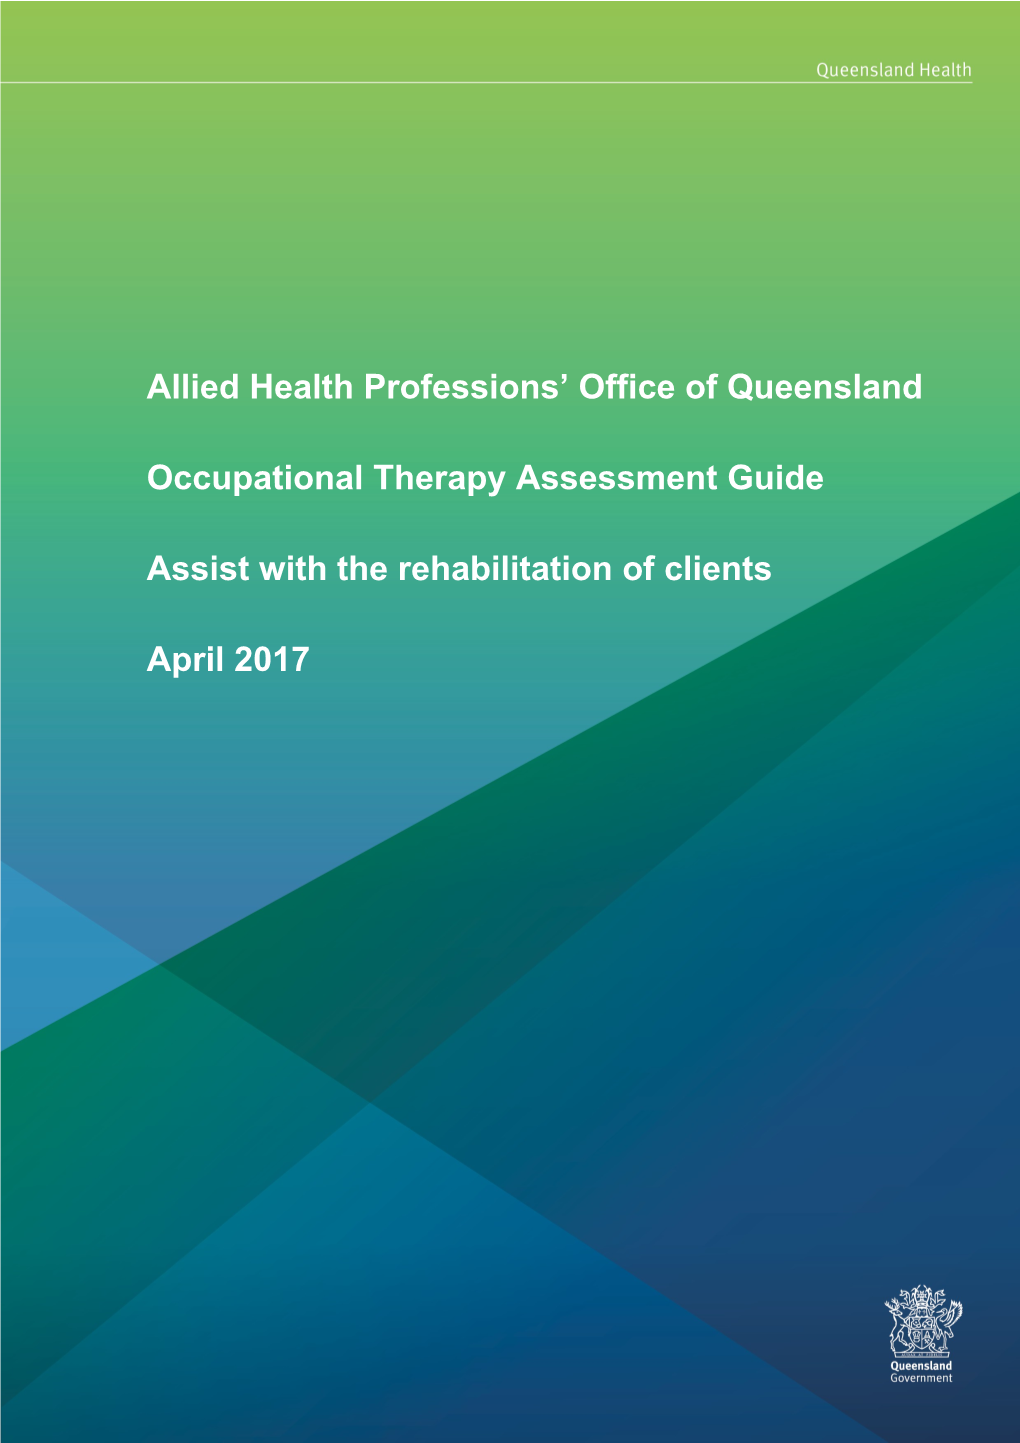 Occupational Therapy Assessment Guide - Assist with the Rehabilitation of Clients